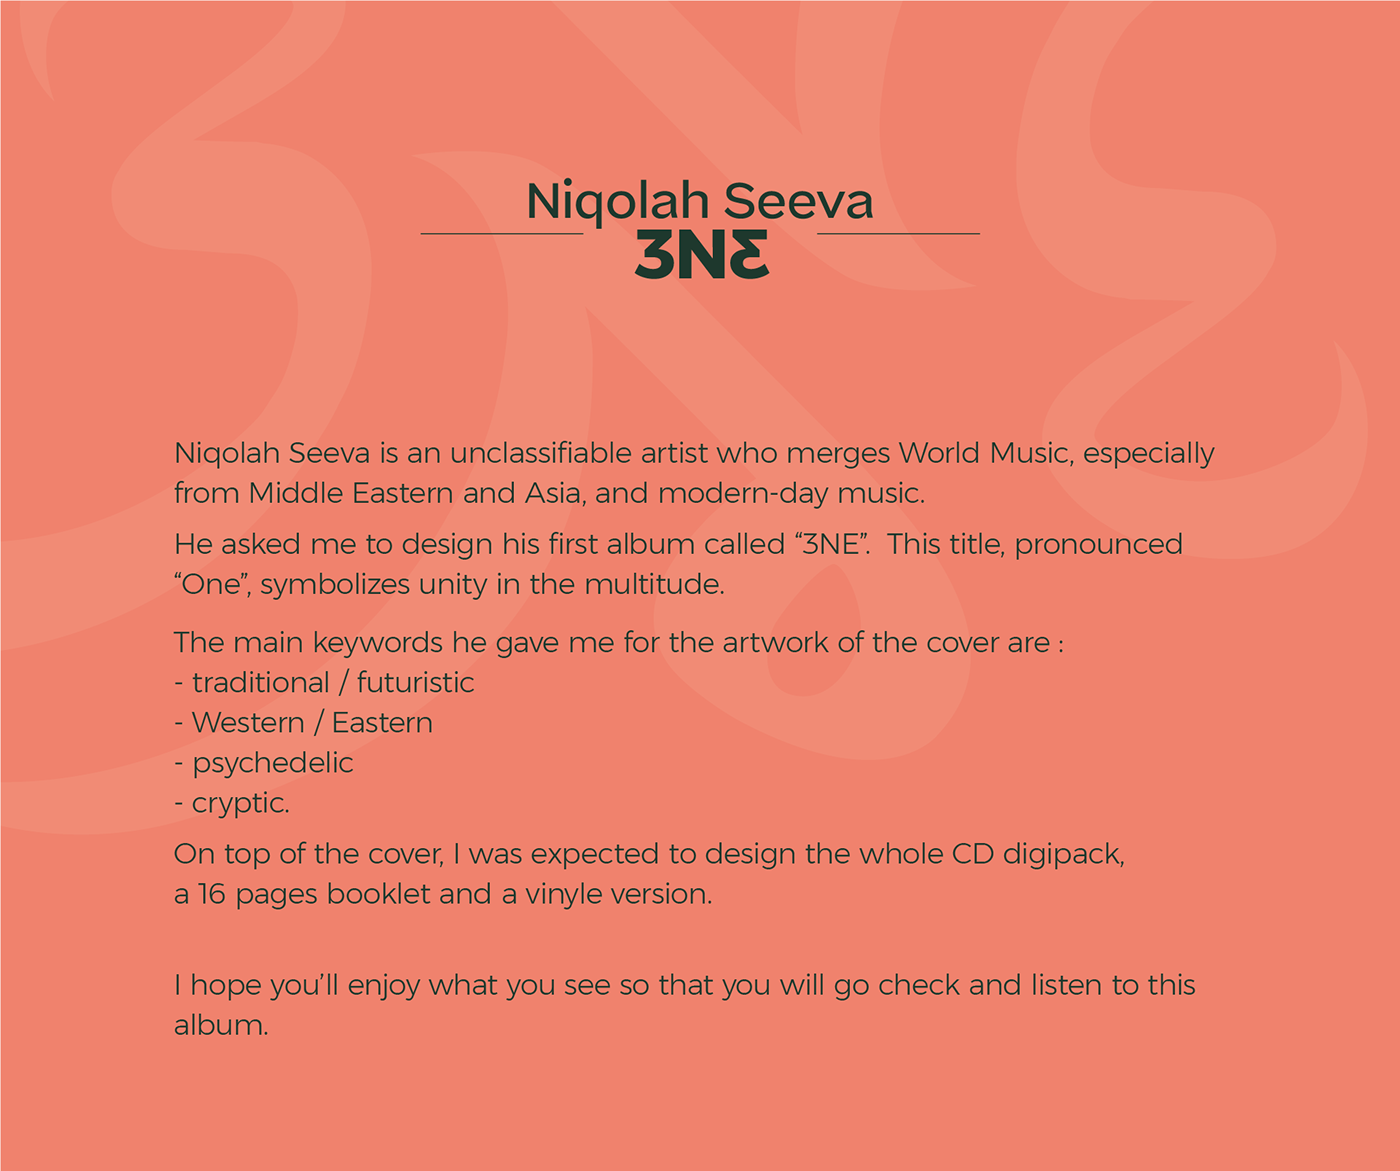 Booklet digipack Niqolah Seeva vinyle World Music cover cryptic One psychedelic western/eastern